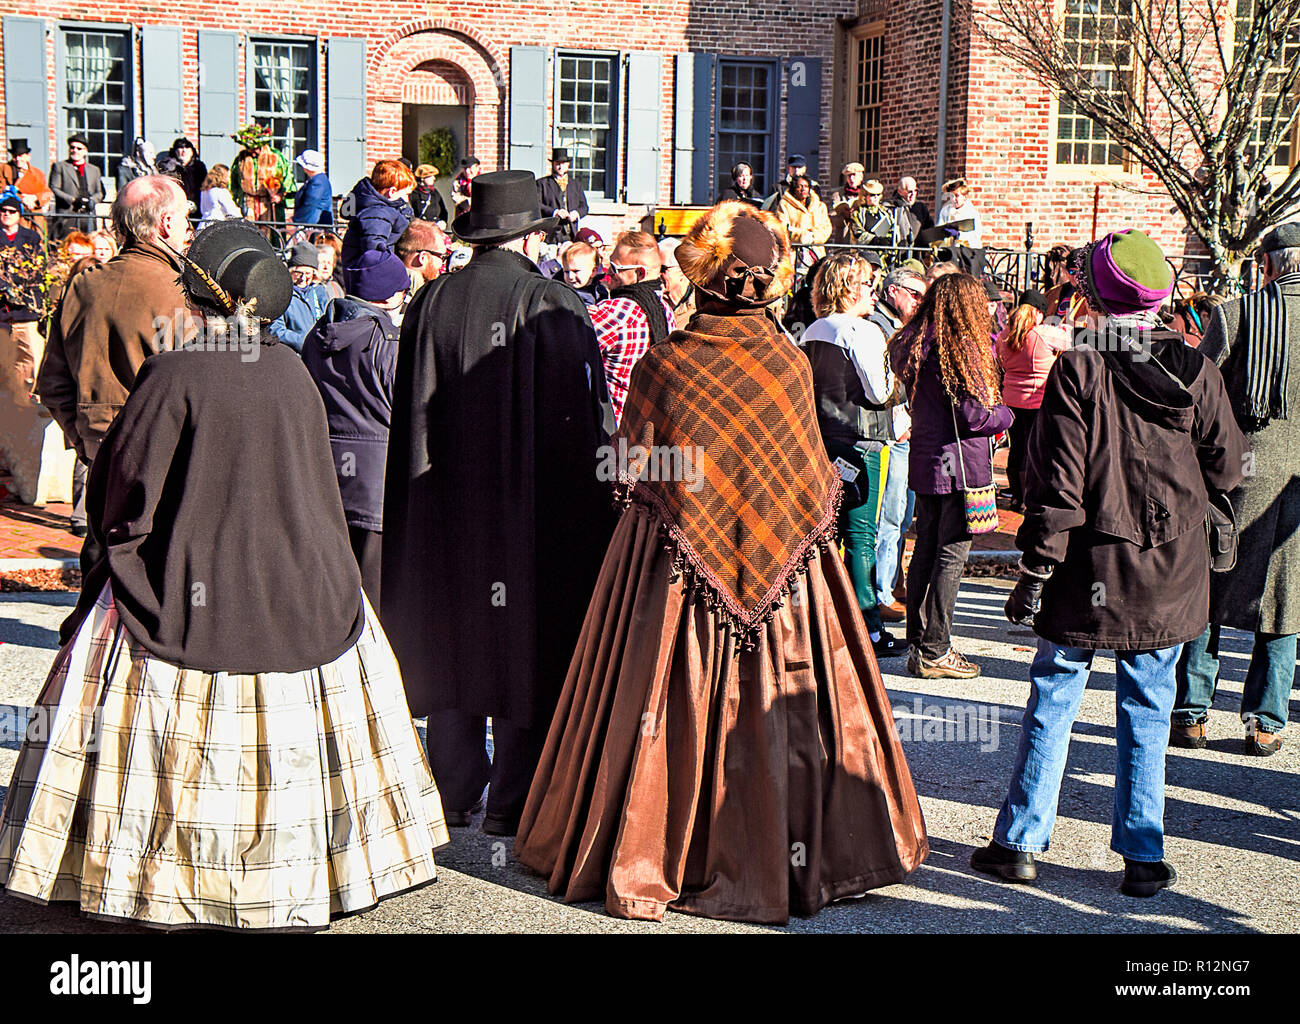 Christmas celebration in Old New Castle with actors in costumes from  a play performed on grounds mingling among visiting guests. Stock Photo